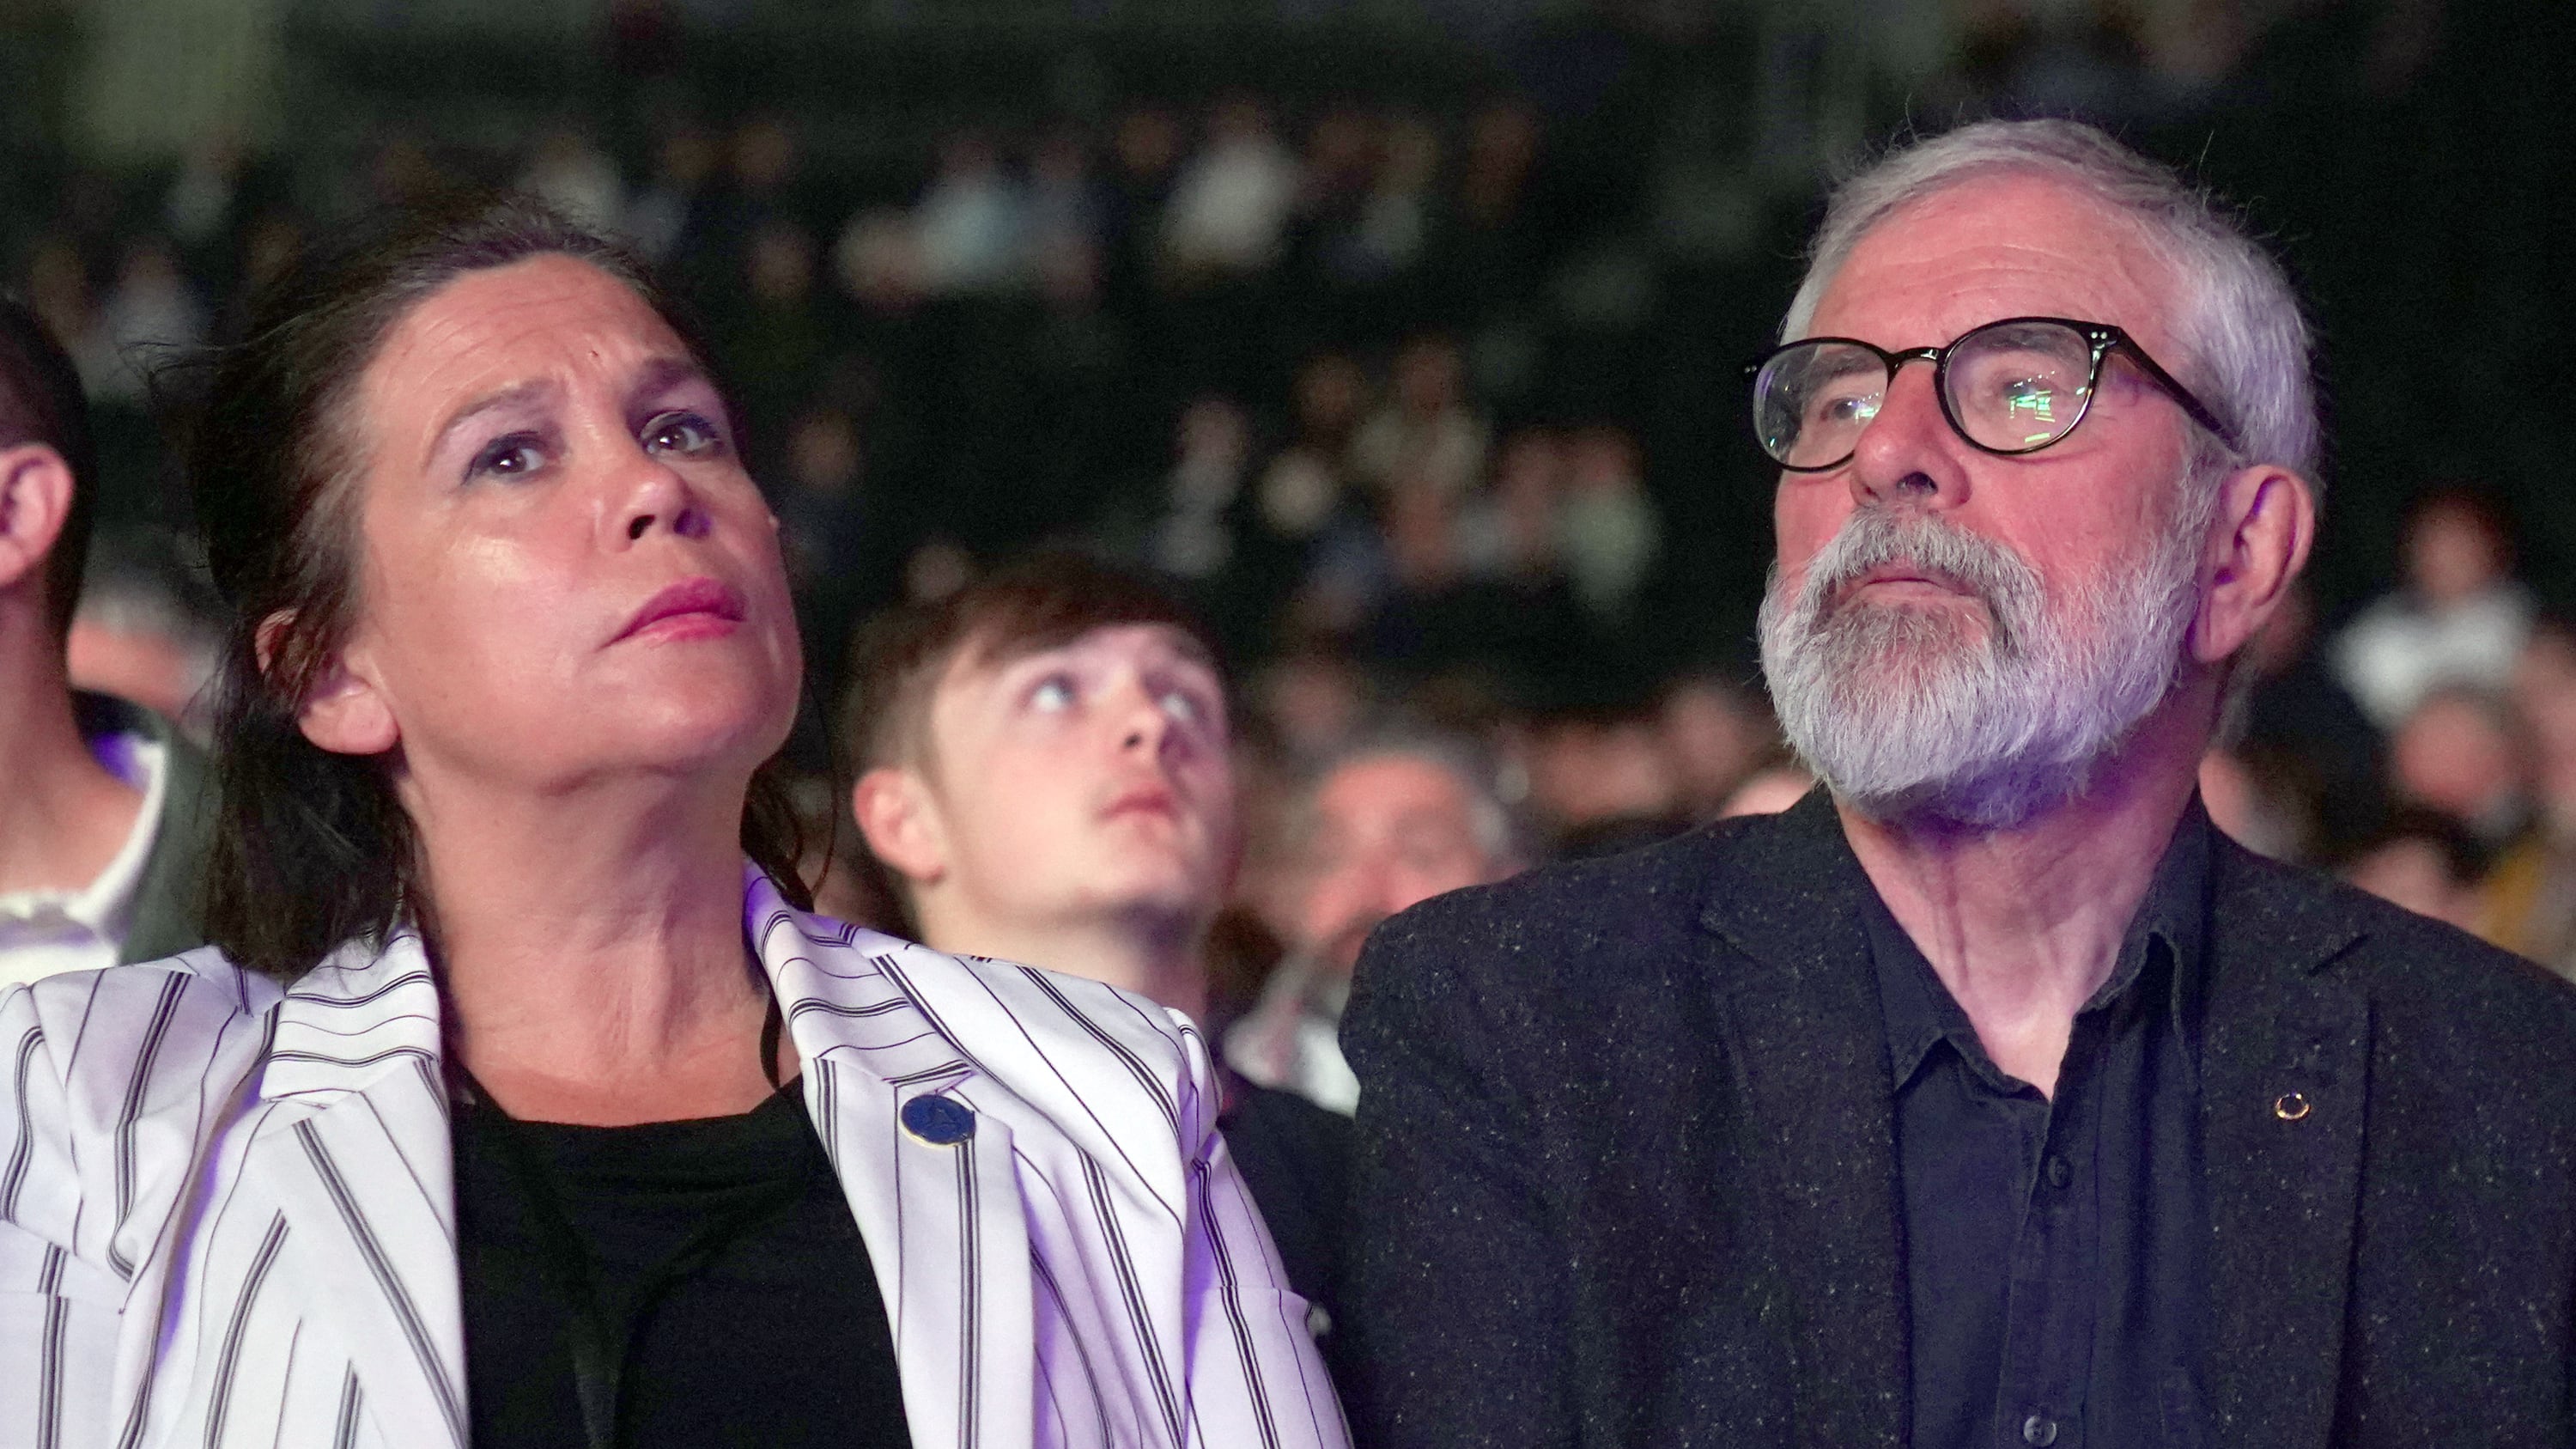 Sinn Fein’s President Mary Lou McDonald with former Sinn Fein president Gerry Adams, during pro-unity group Ireland’s Future event at the SSE Arena